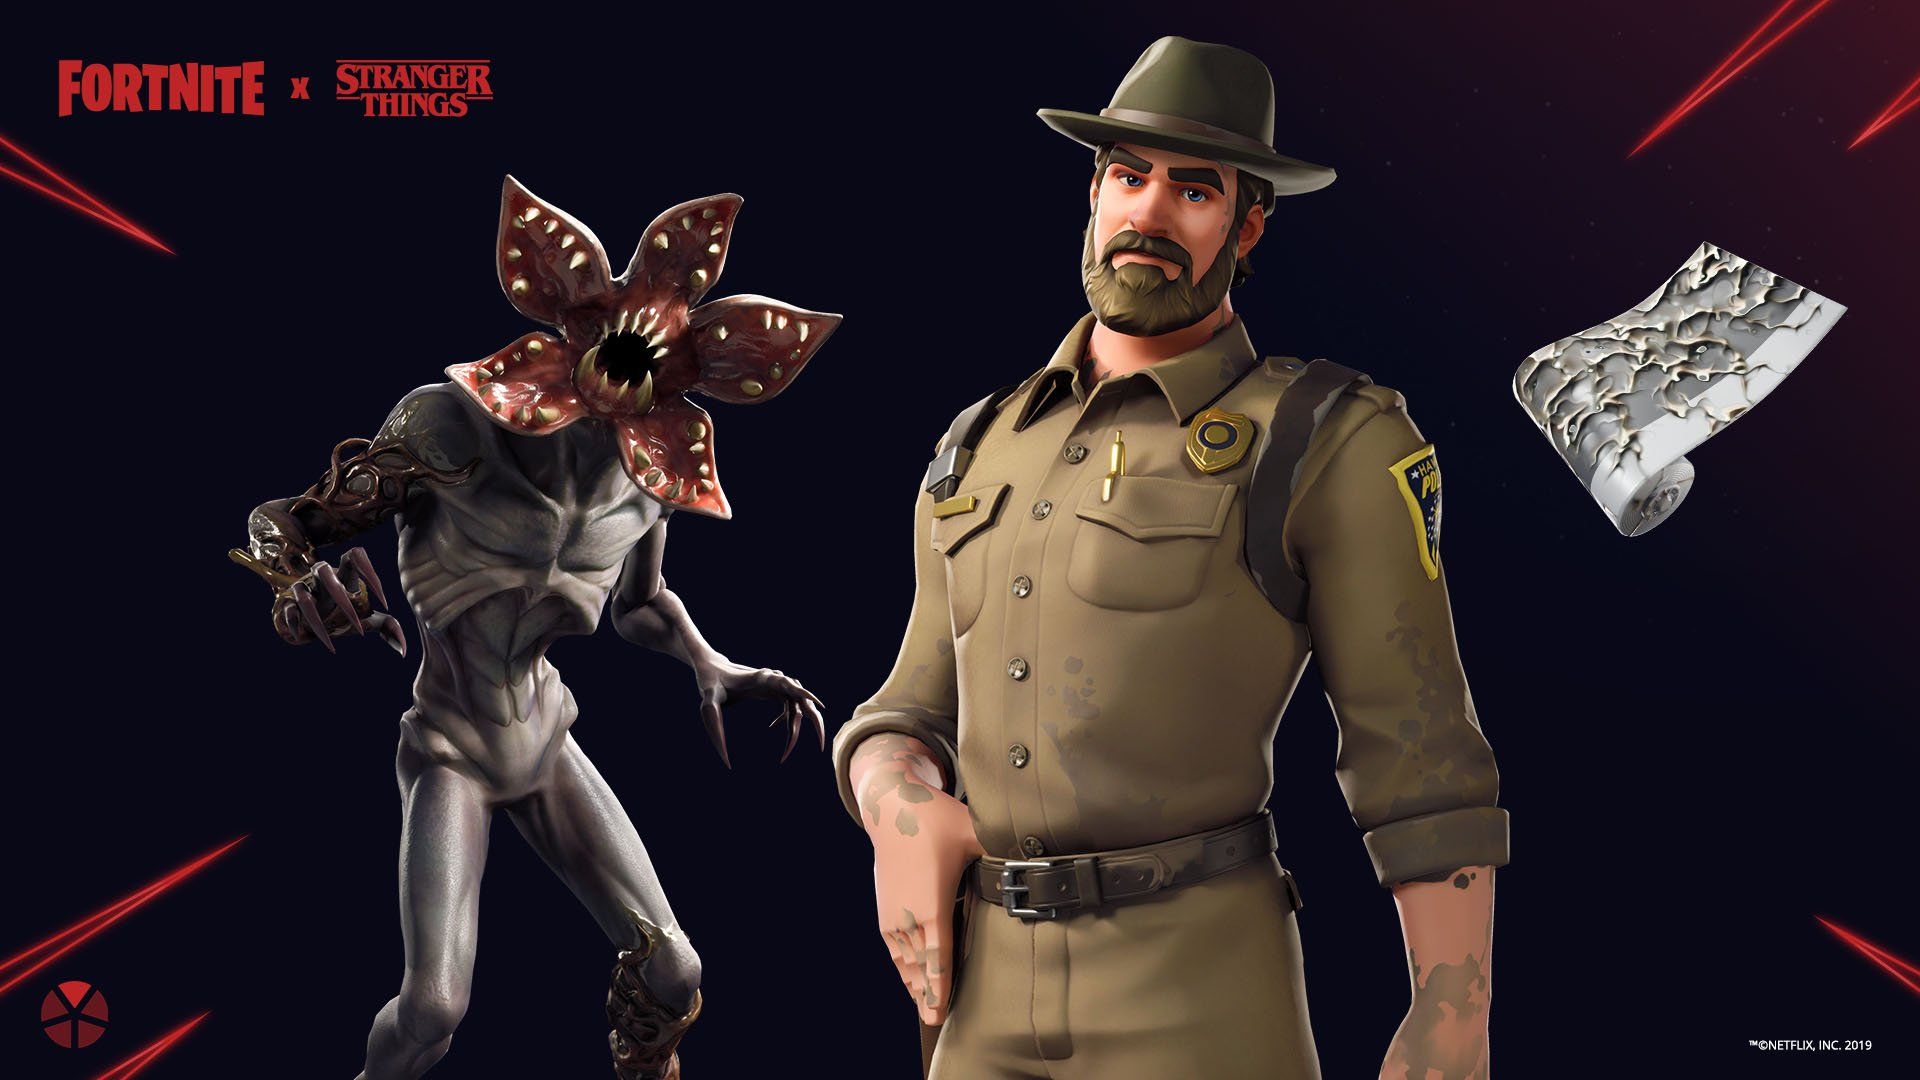 Fortnite brings back 'Chief Hopper' and 'Demogorgon' Outfits for Stranger Things Day